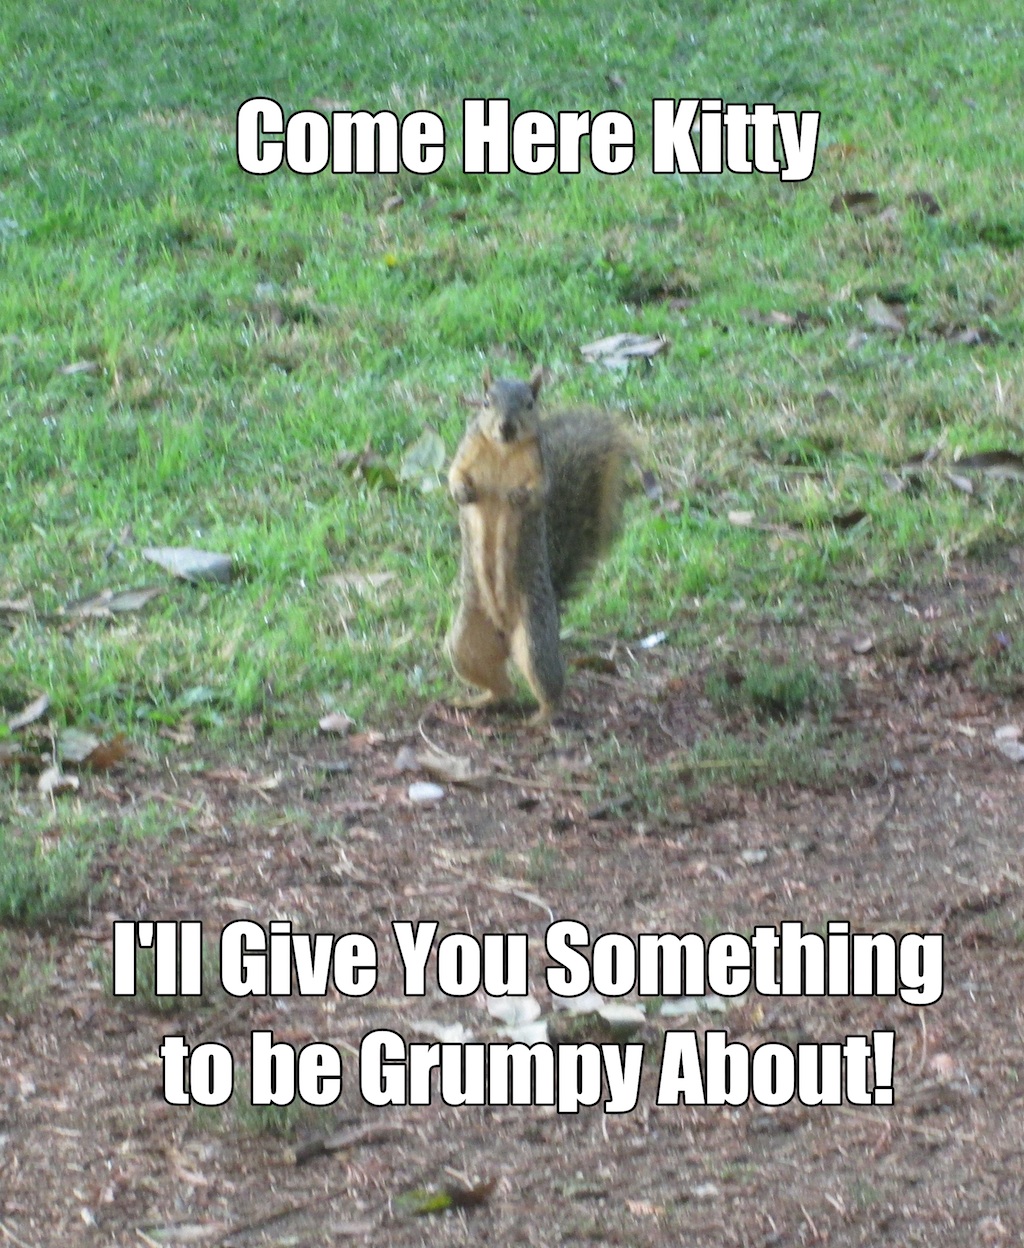 Come here kitty. I'll give you something to be grumpy about!